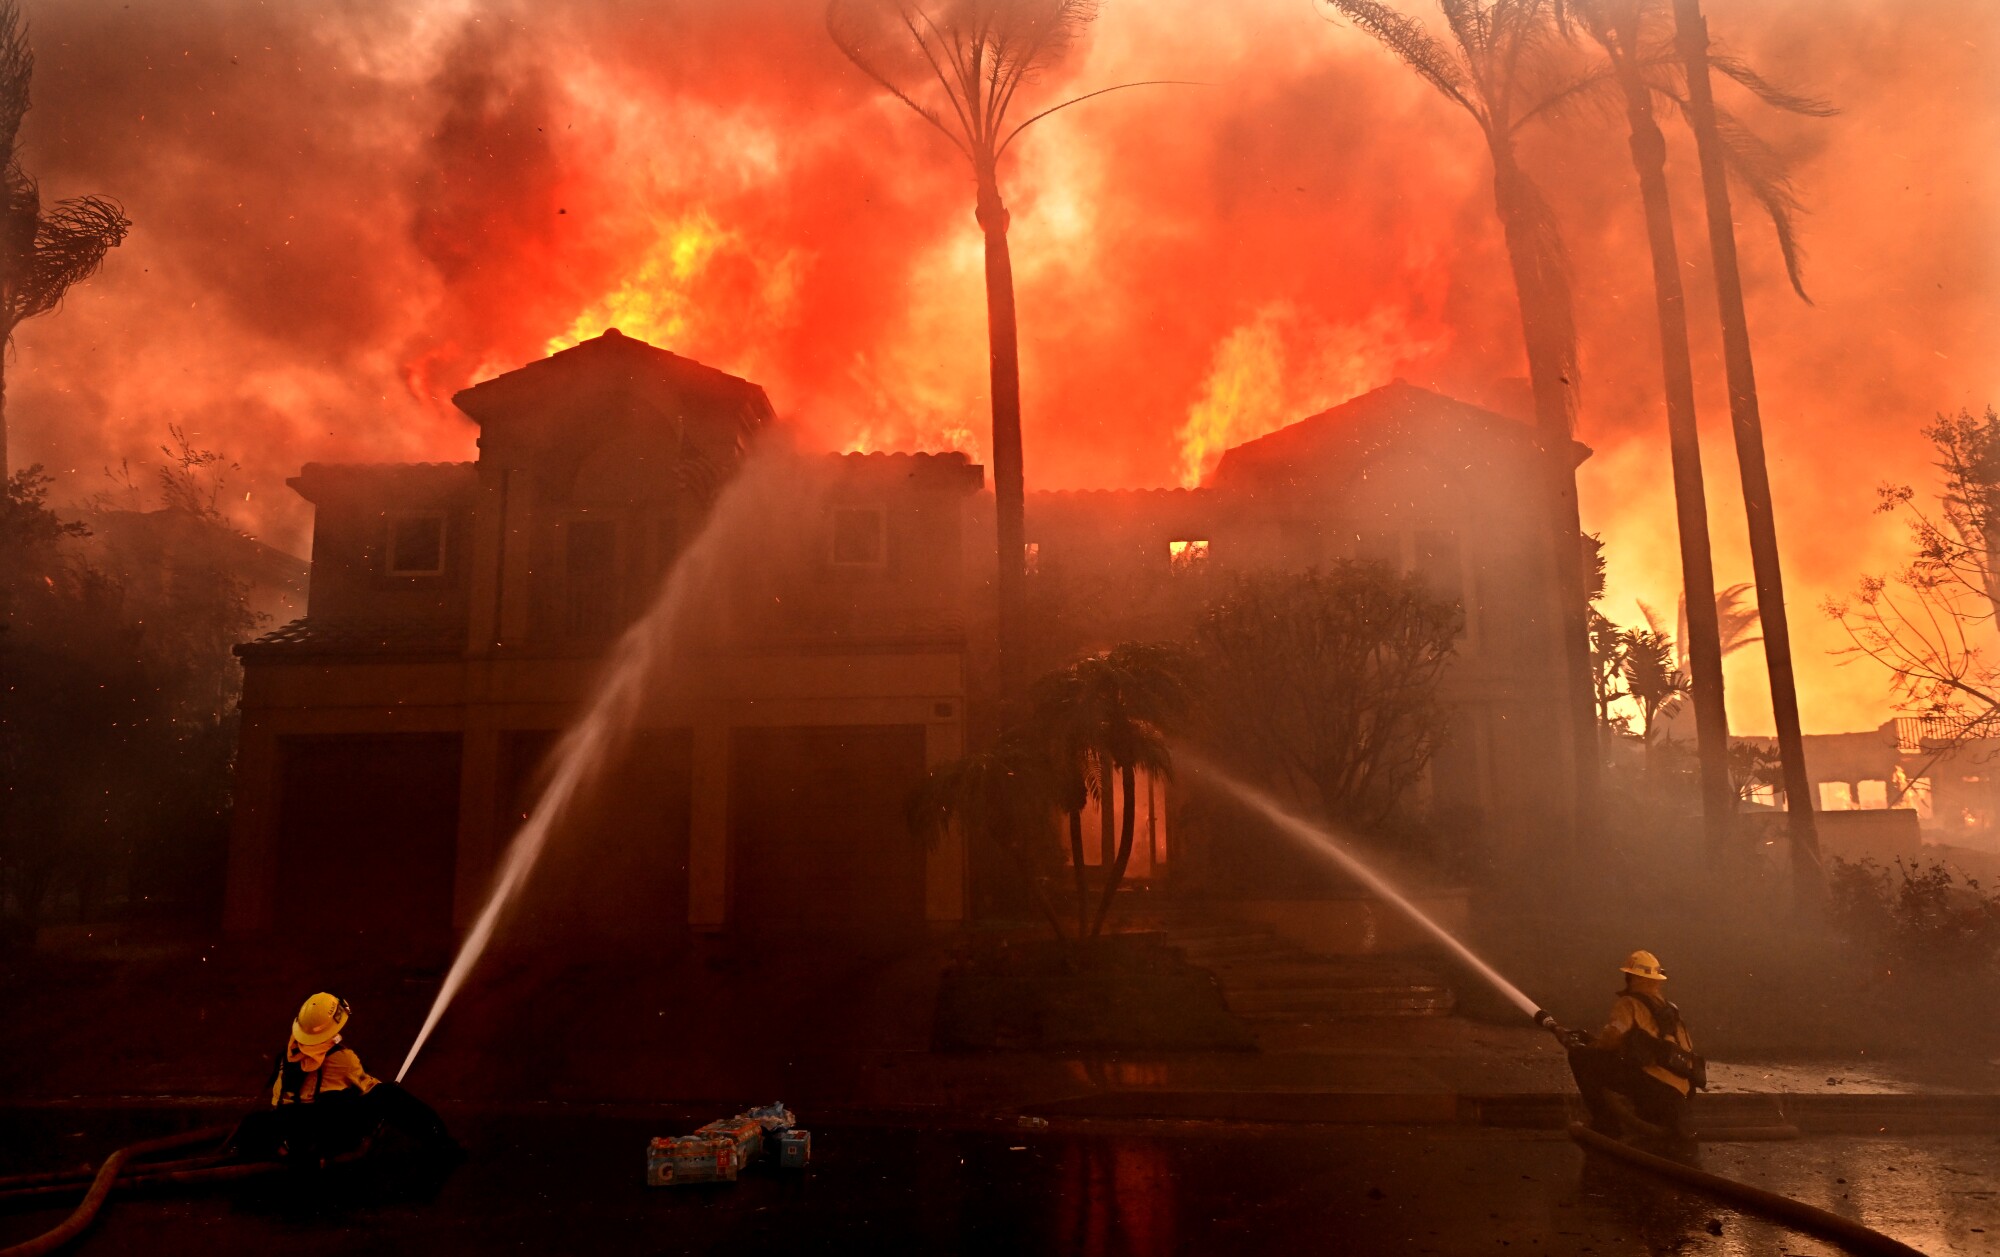 Firefighters direct their hoses on a home on fire in the Coronado Pointe community in Laguna Niguel.